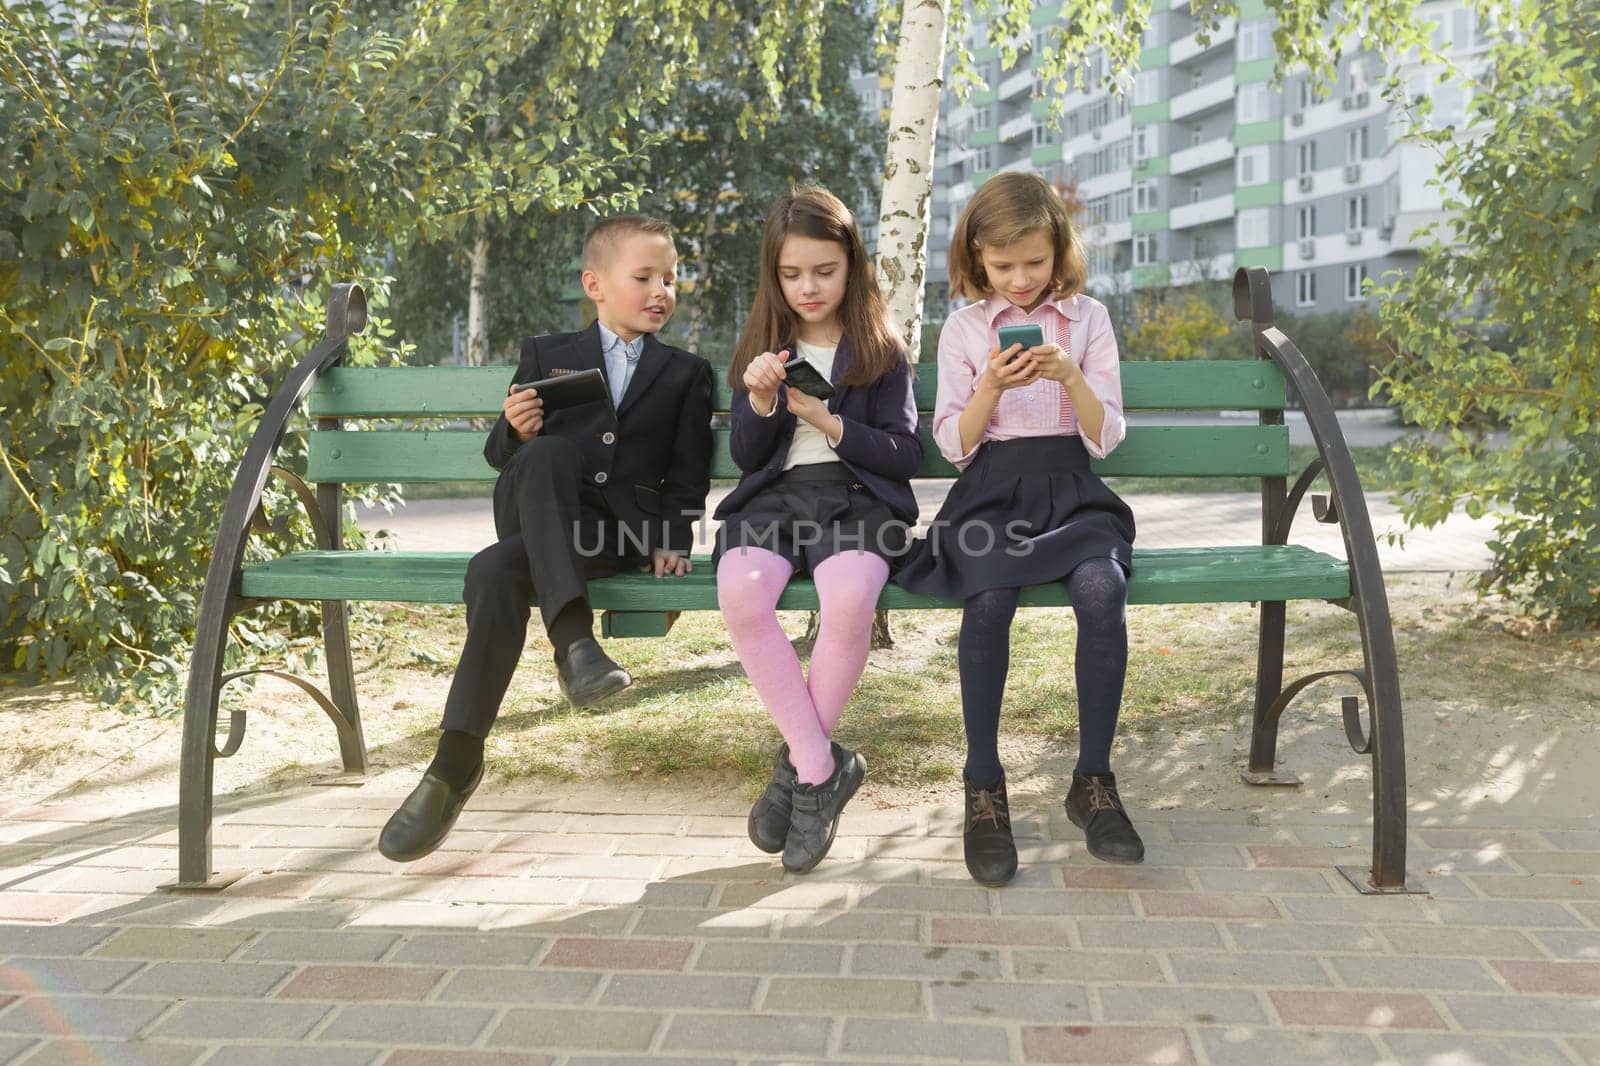 Group of children 7, 8 years old with mobile phones, schoolchildren with backpacks looking into smartphones, outdoor background. Education, friendship, technology and people concept